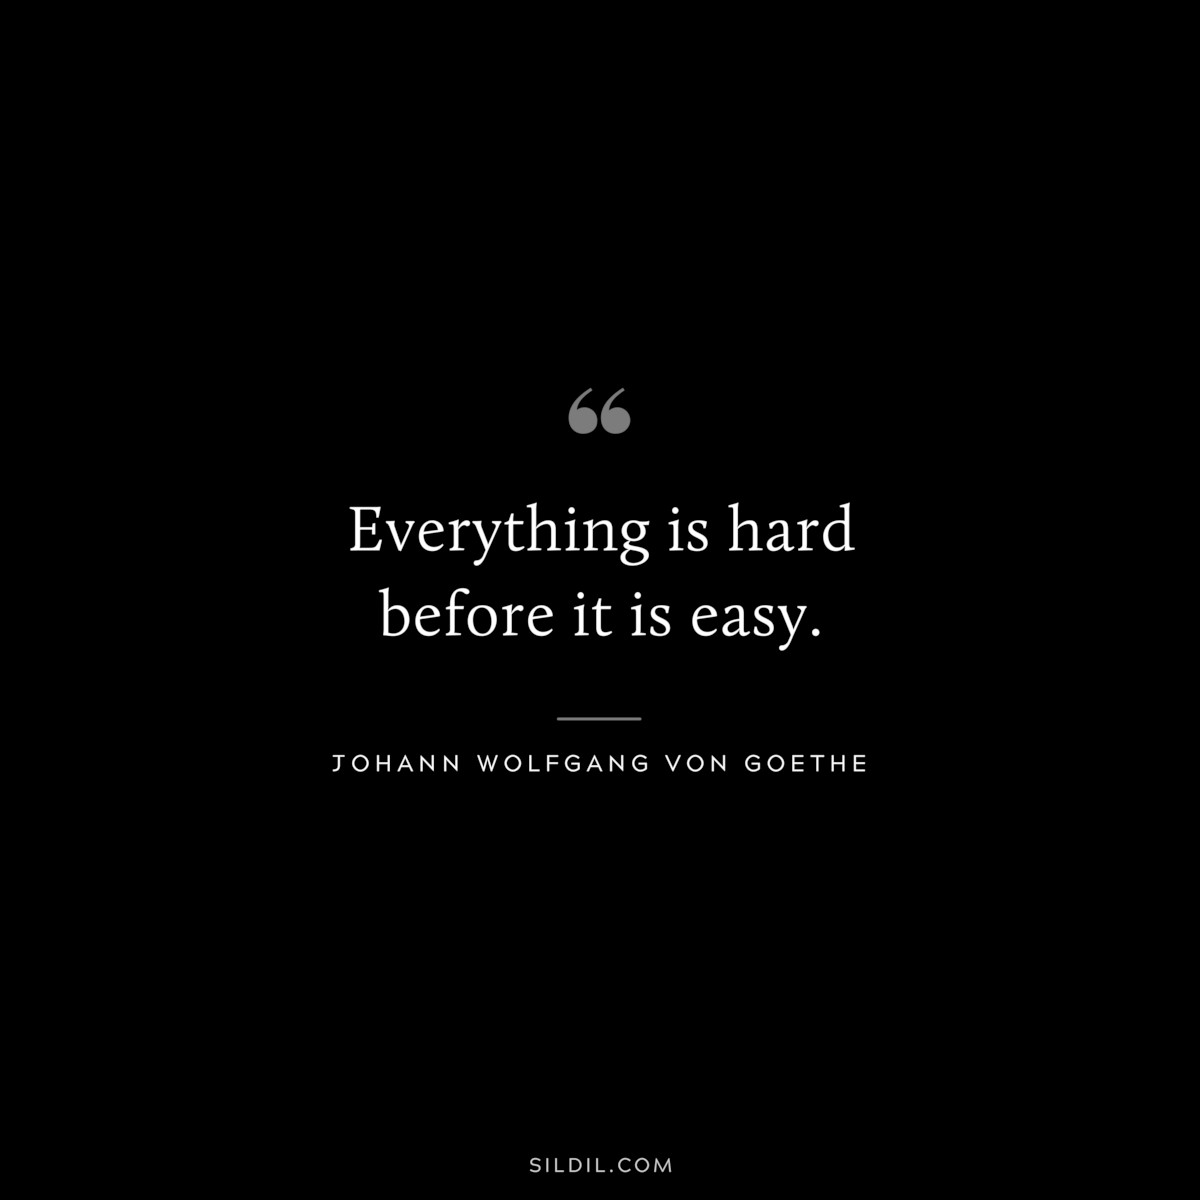 Everything is hard before it is easy.― Johann Wolfgang von Goethe